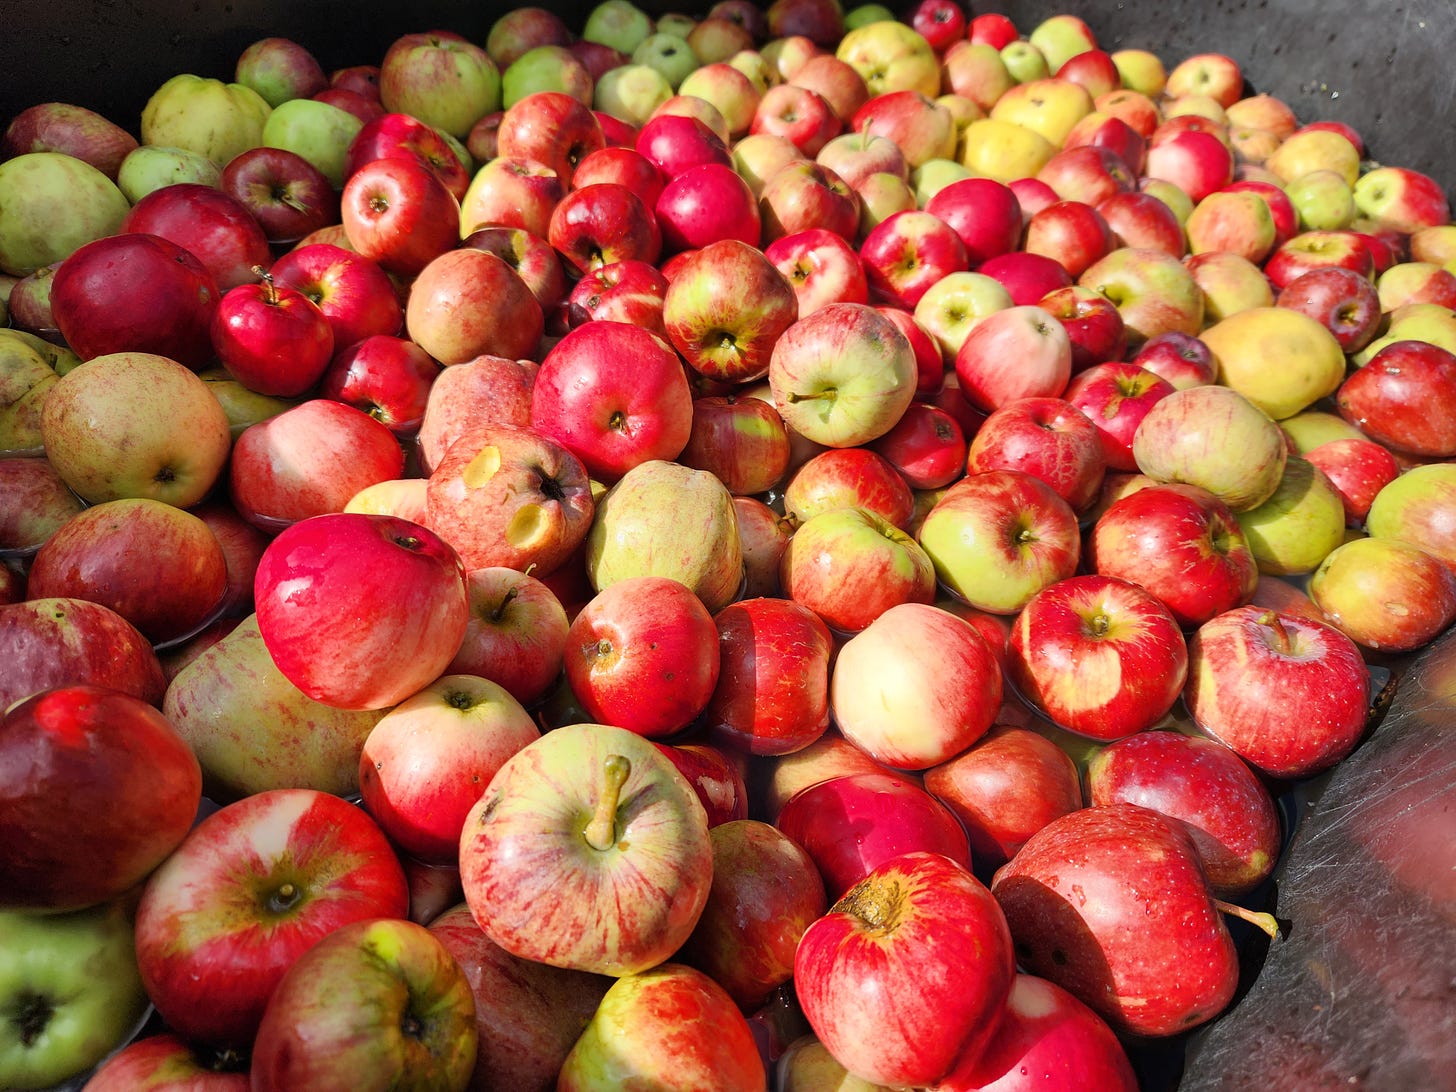 piles of red and red/green apples